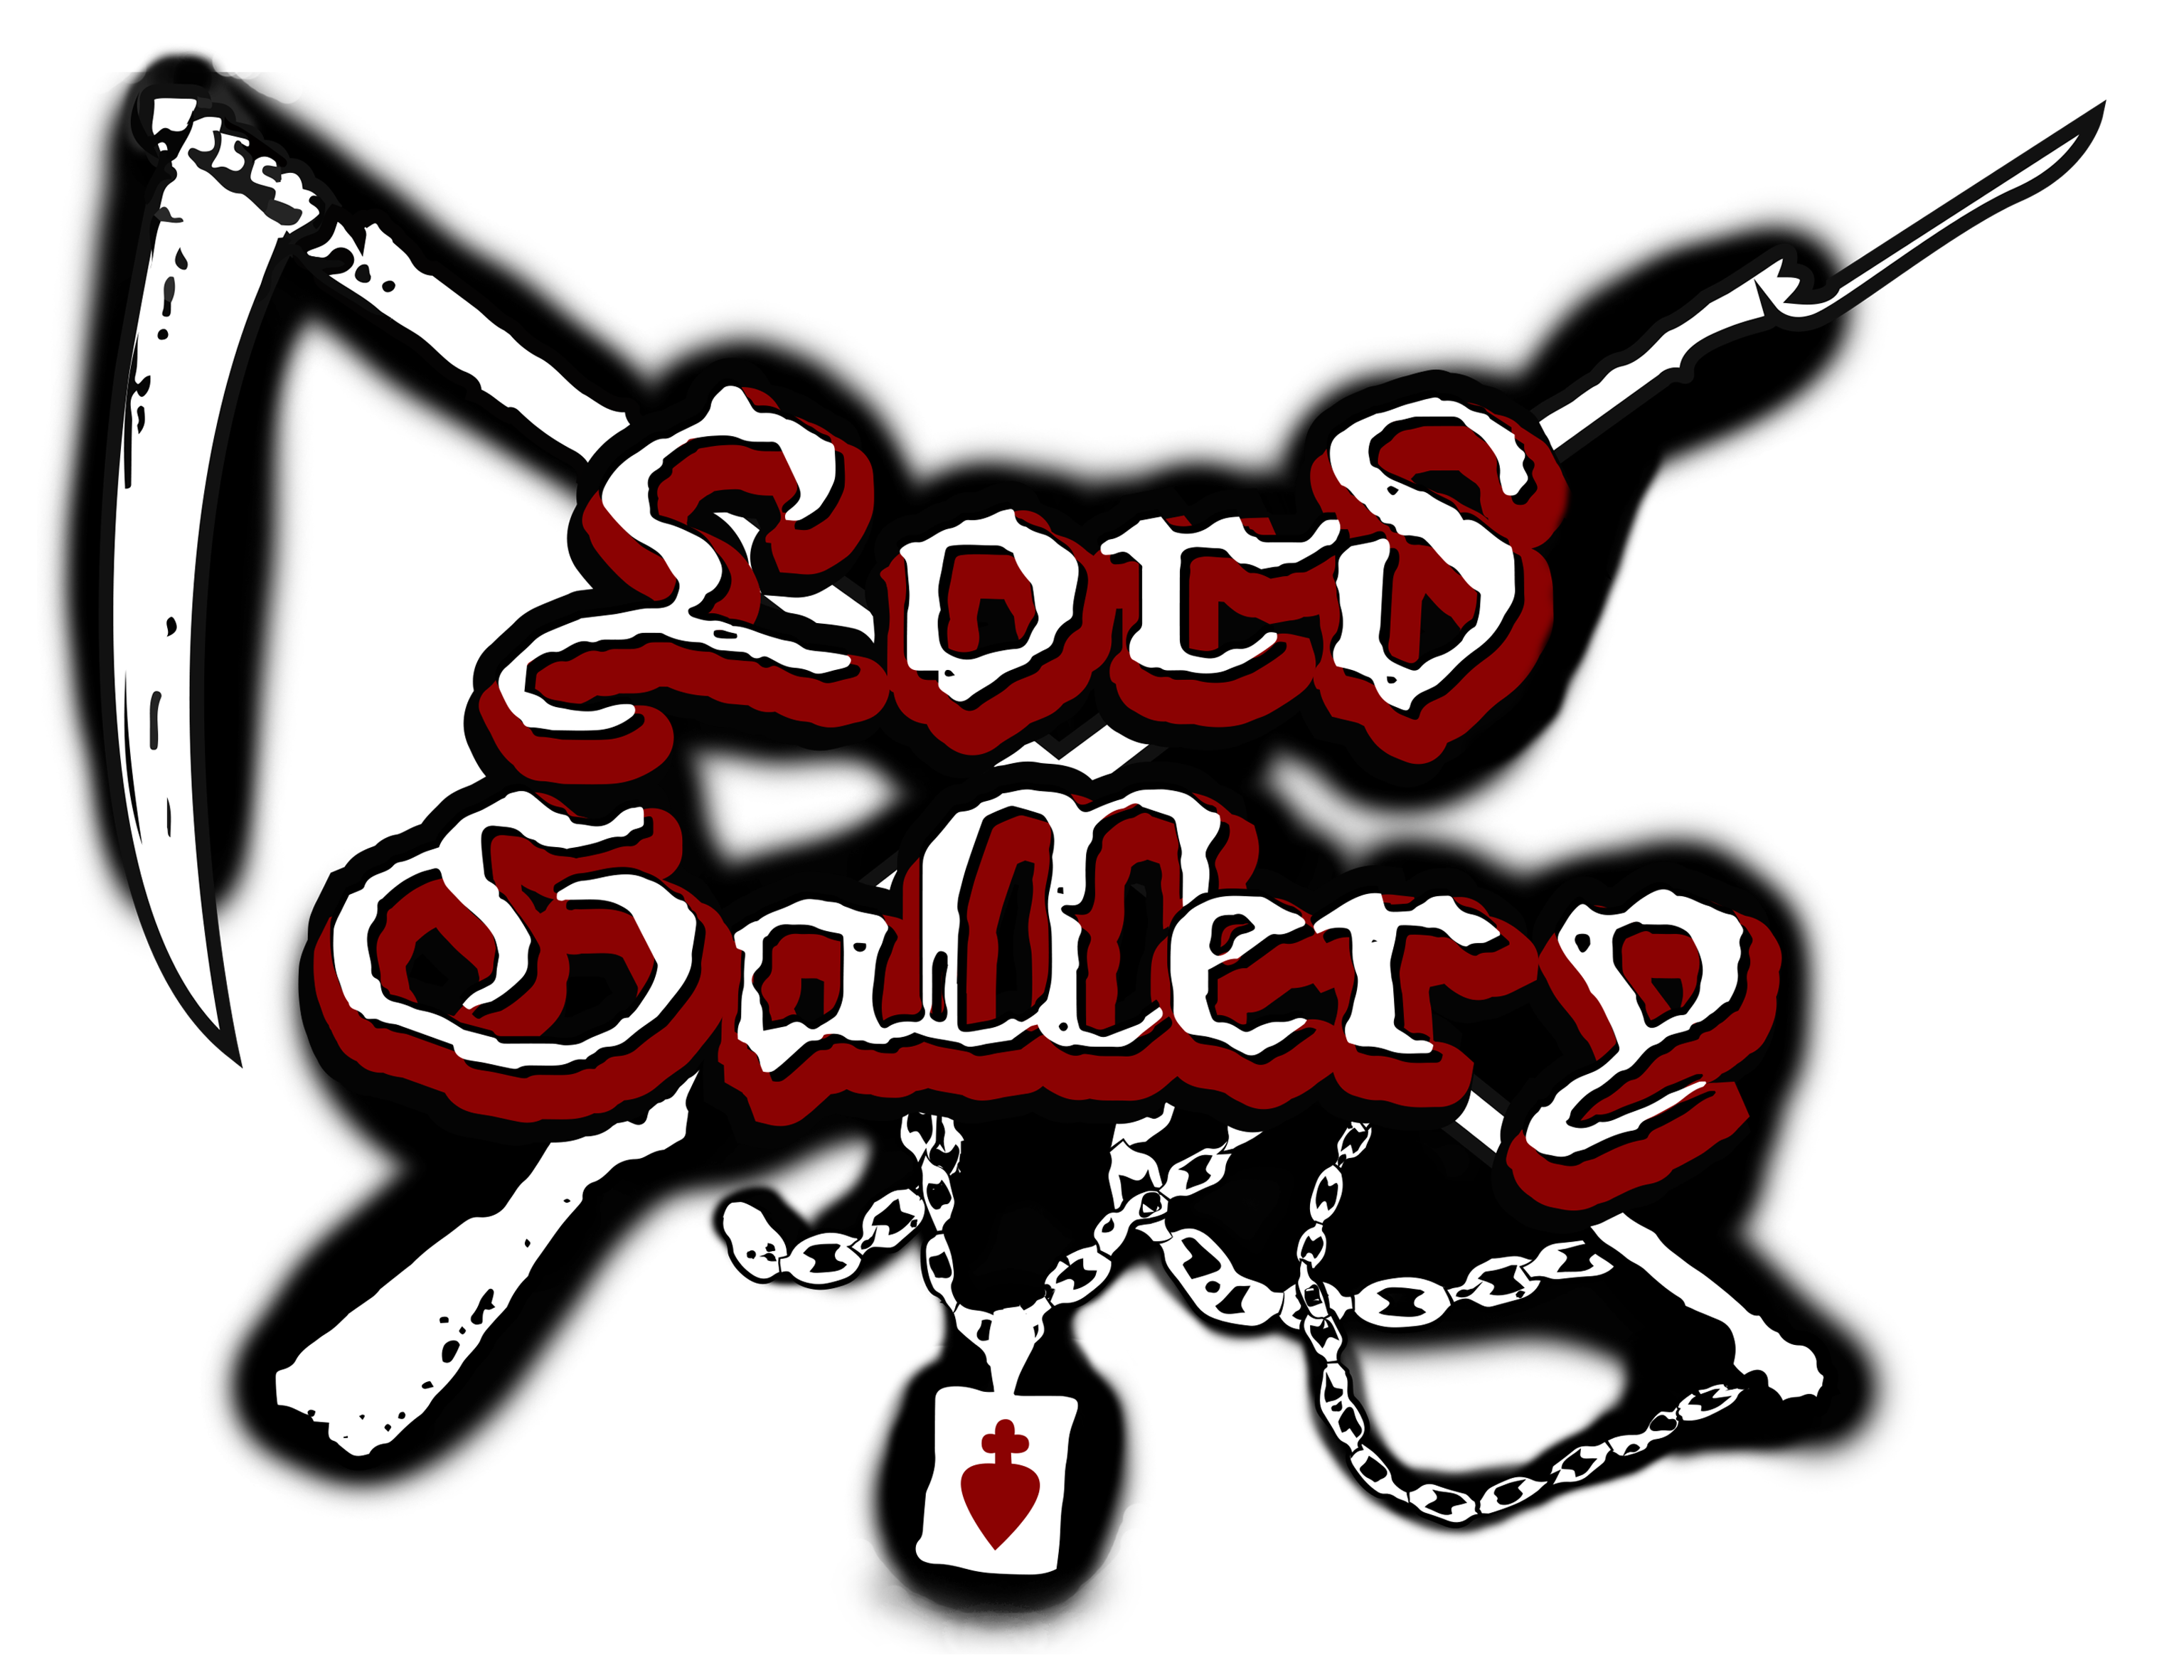 Lord Gallery